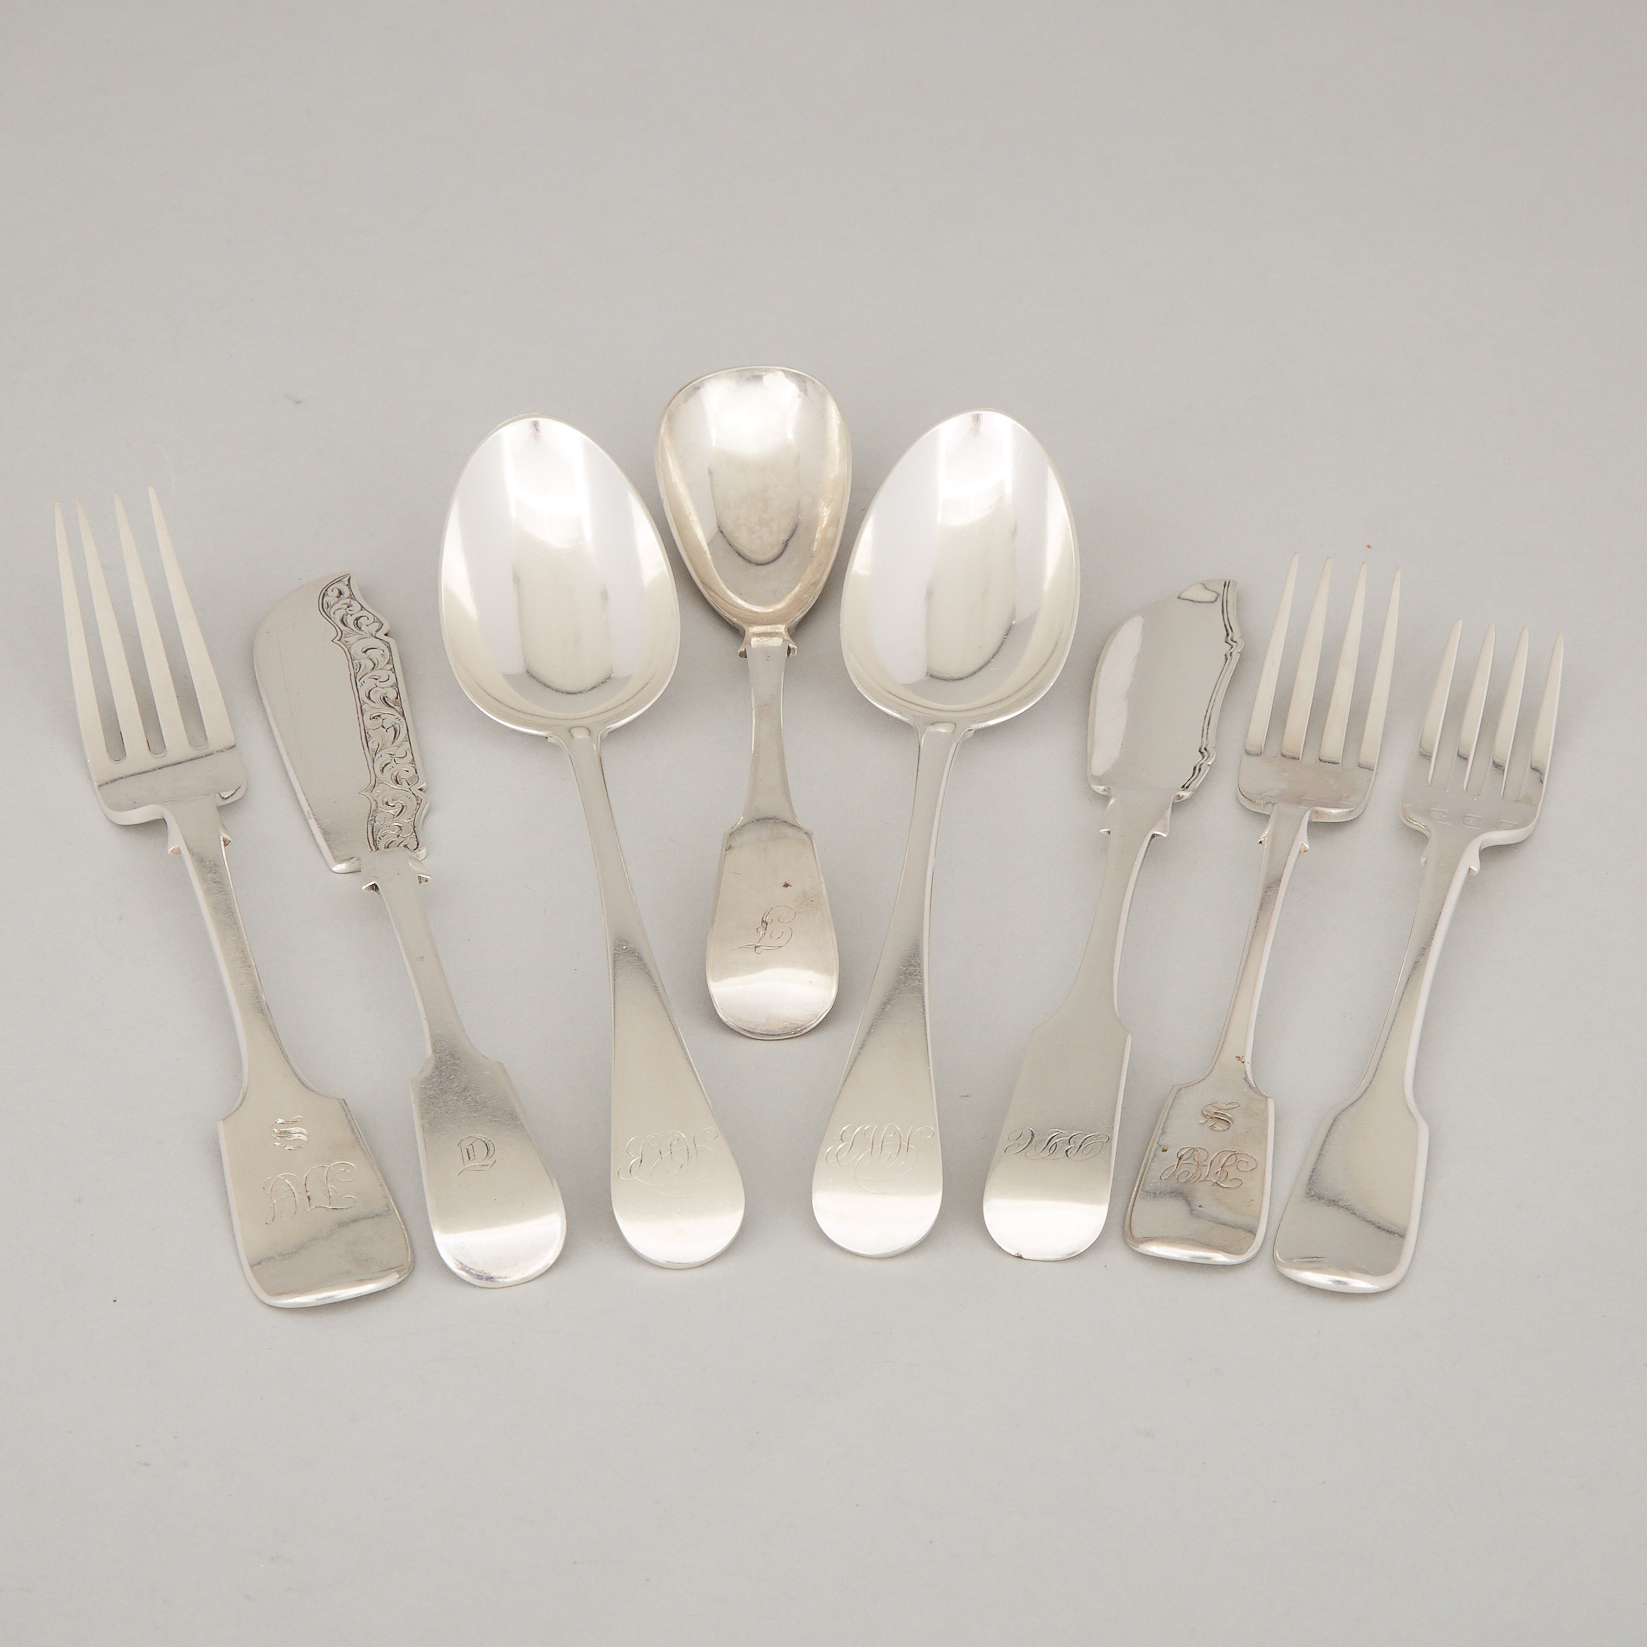 Group of Canadian Silver Flatware, various makers, 19th century